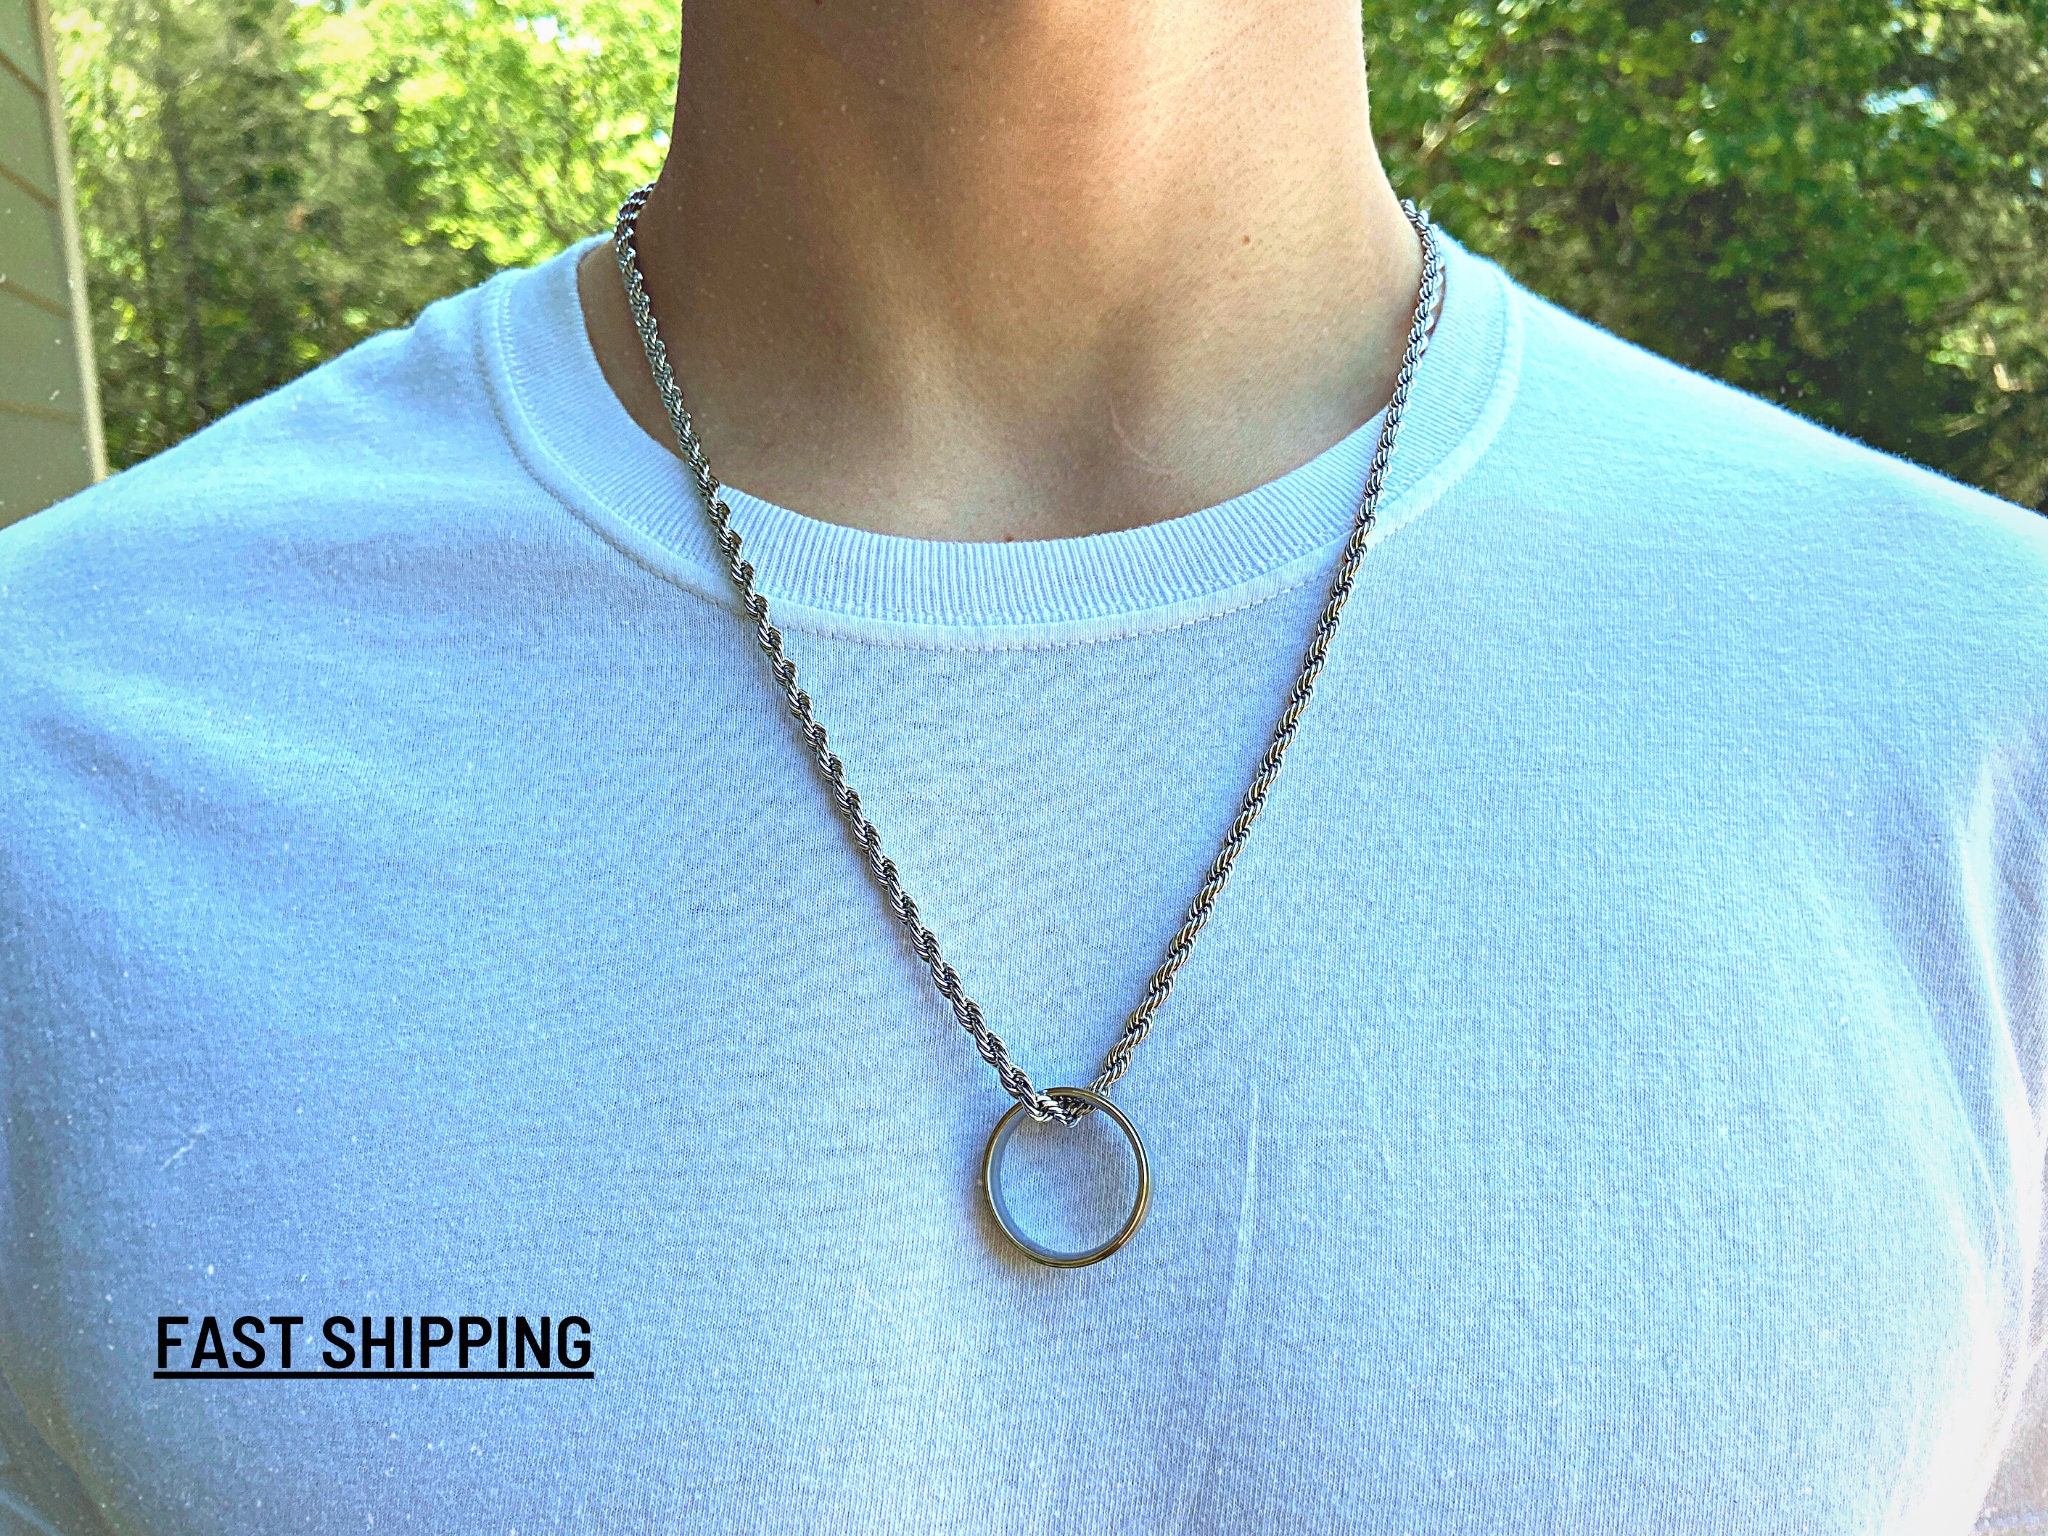 Sphers Buy Necklace Nathan Drake Ring Necklace Men at Ubuy India